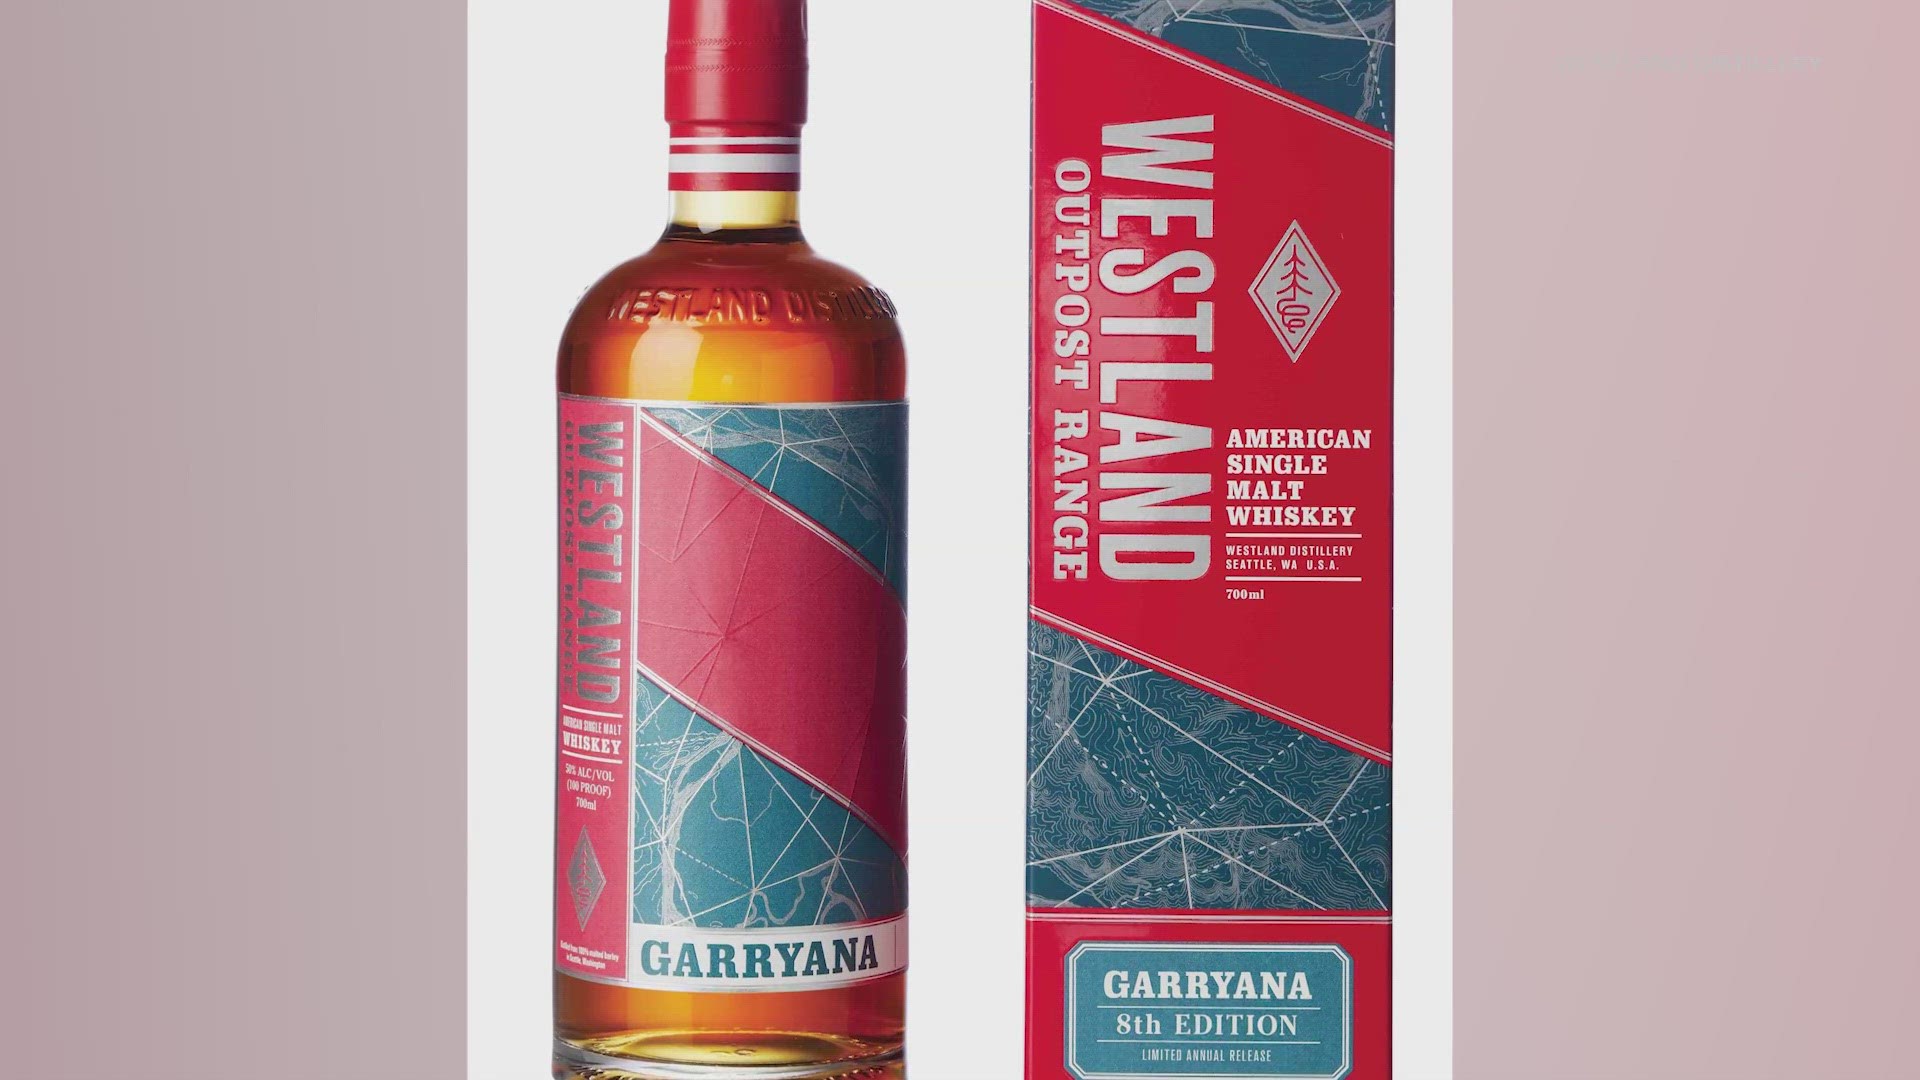 Seattle's Westland Distillery's single malt whiskey is getting awarded as third best in the world in Whisky Advocate's 2023 rankings.